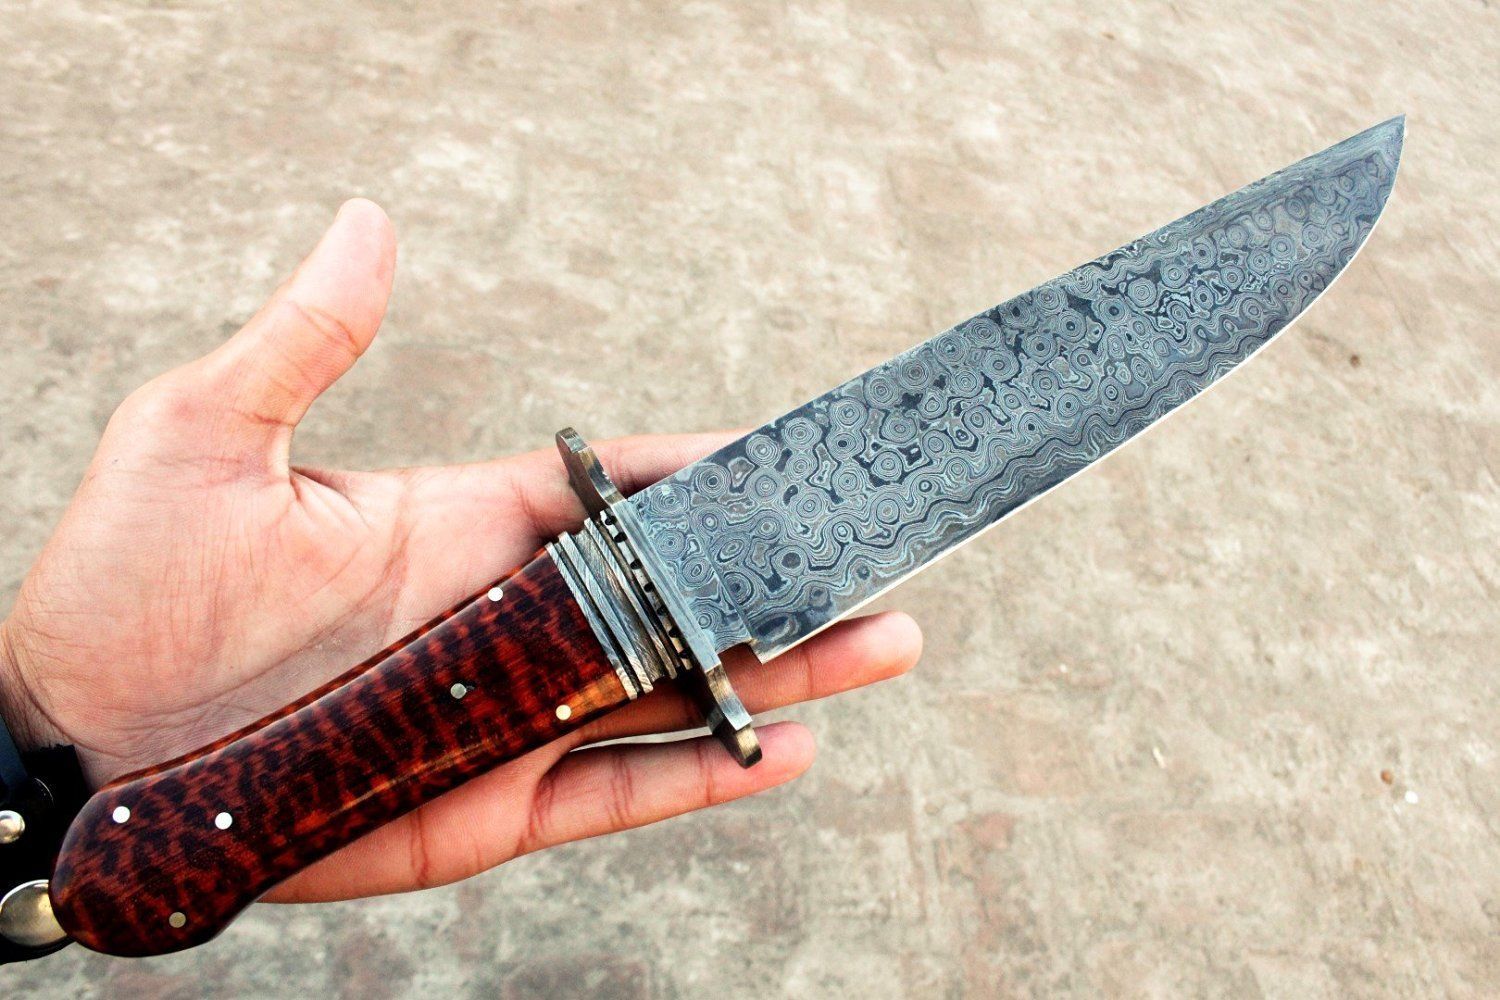 What Are Obsidian Knives and Why They Are Rare?